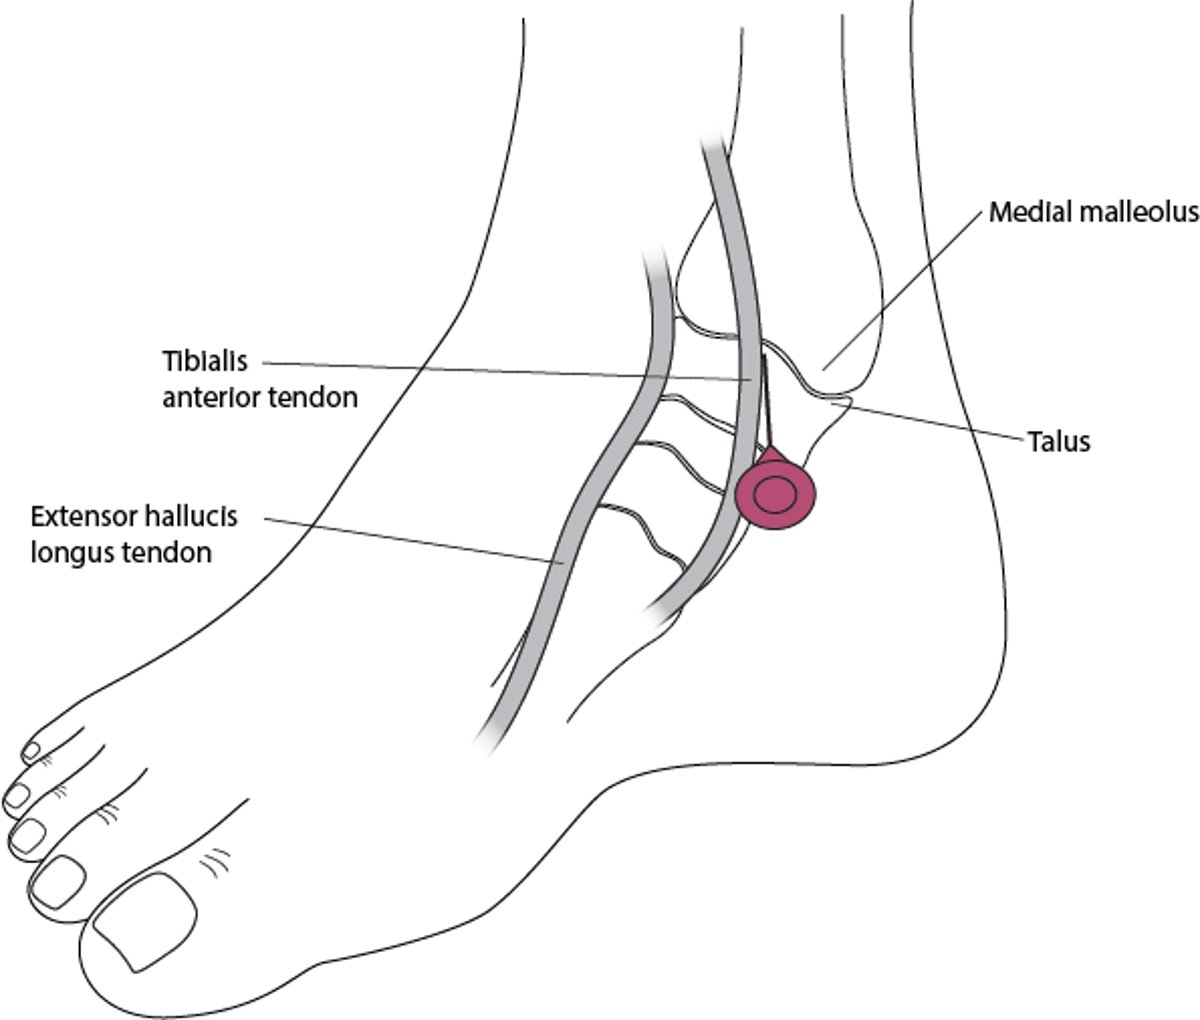 Arthrocentesis of the ankle